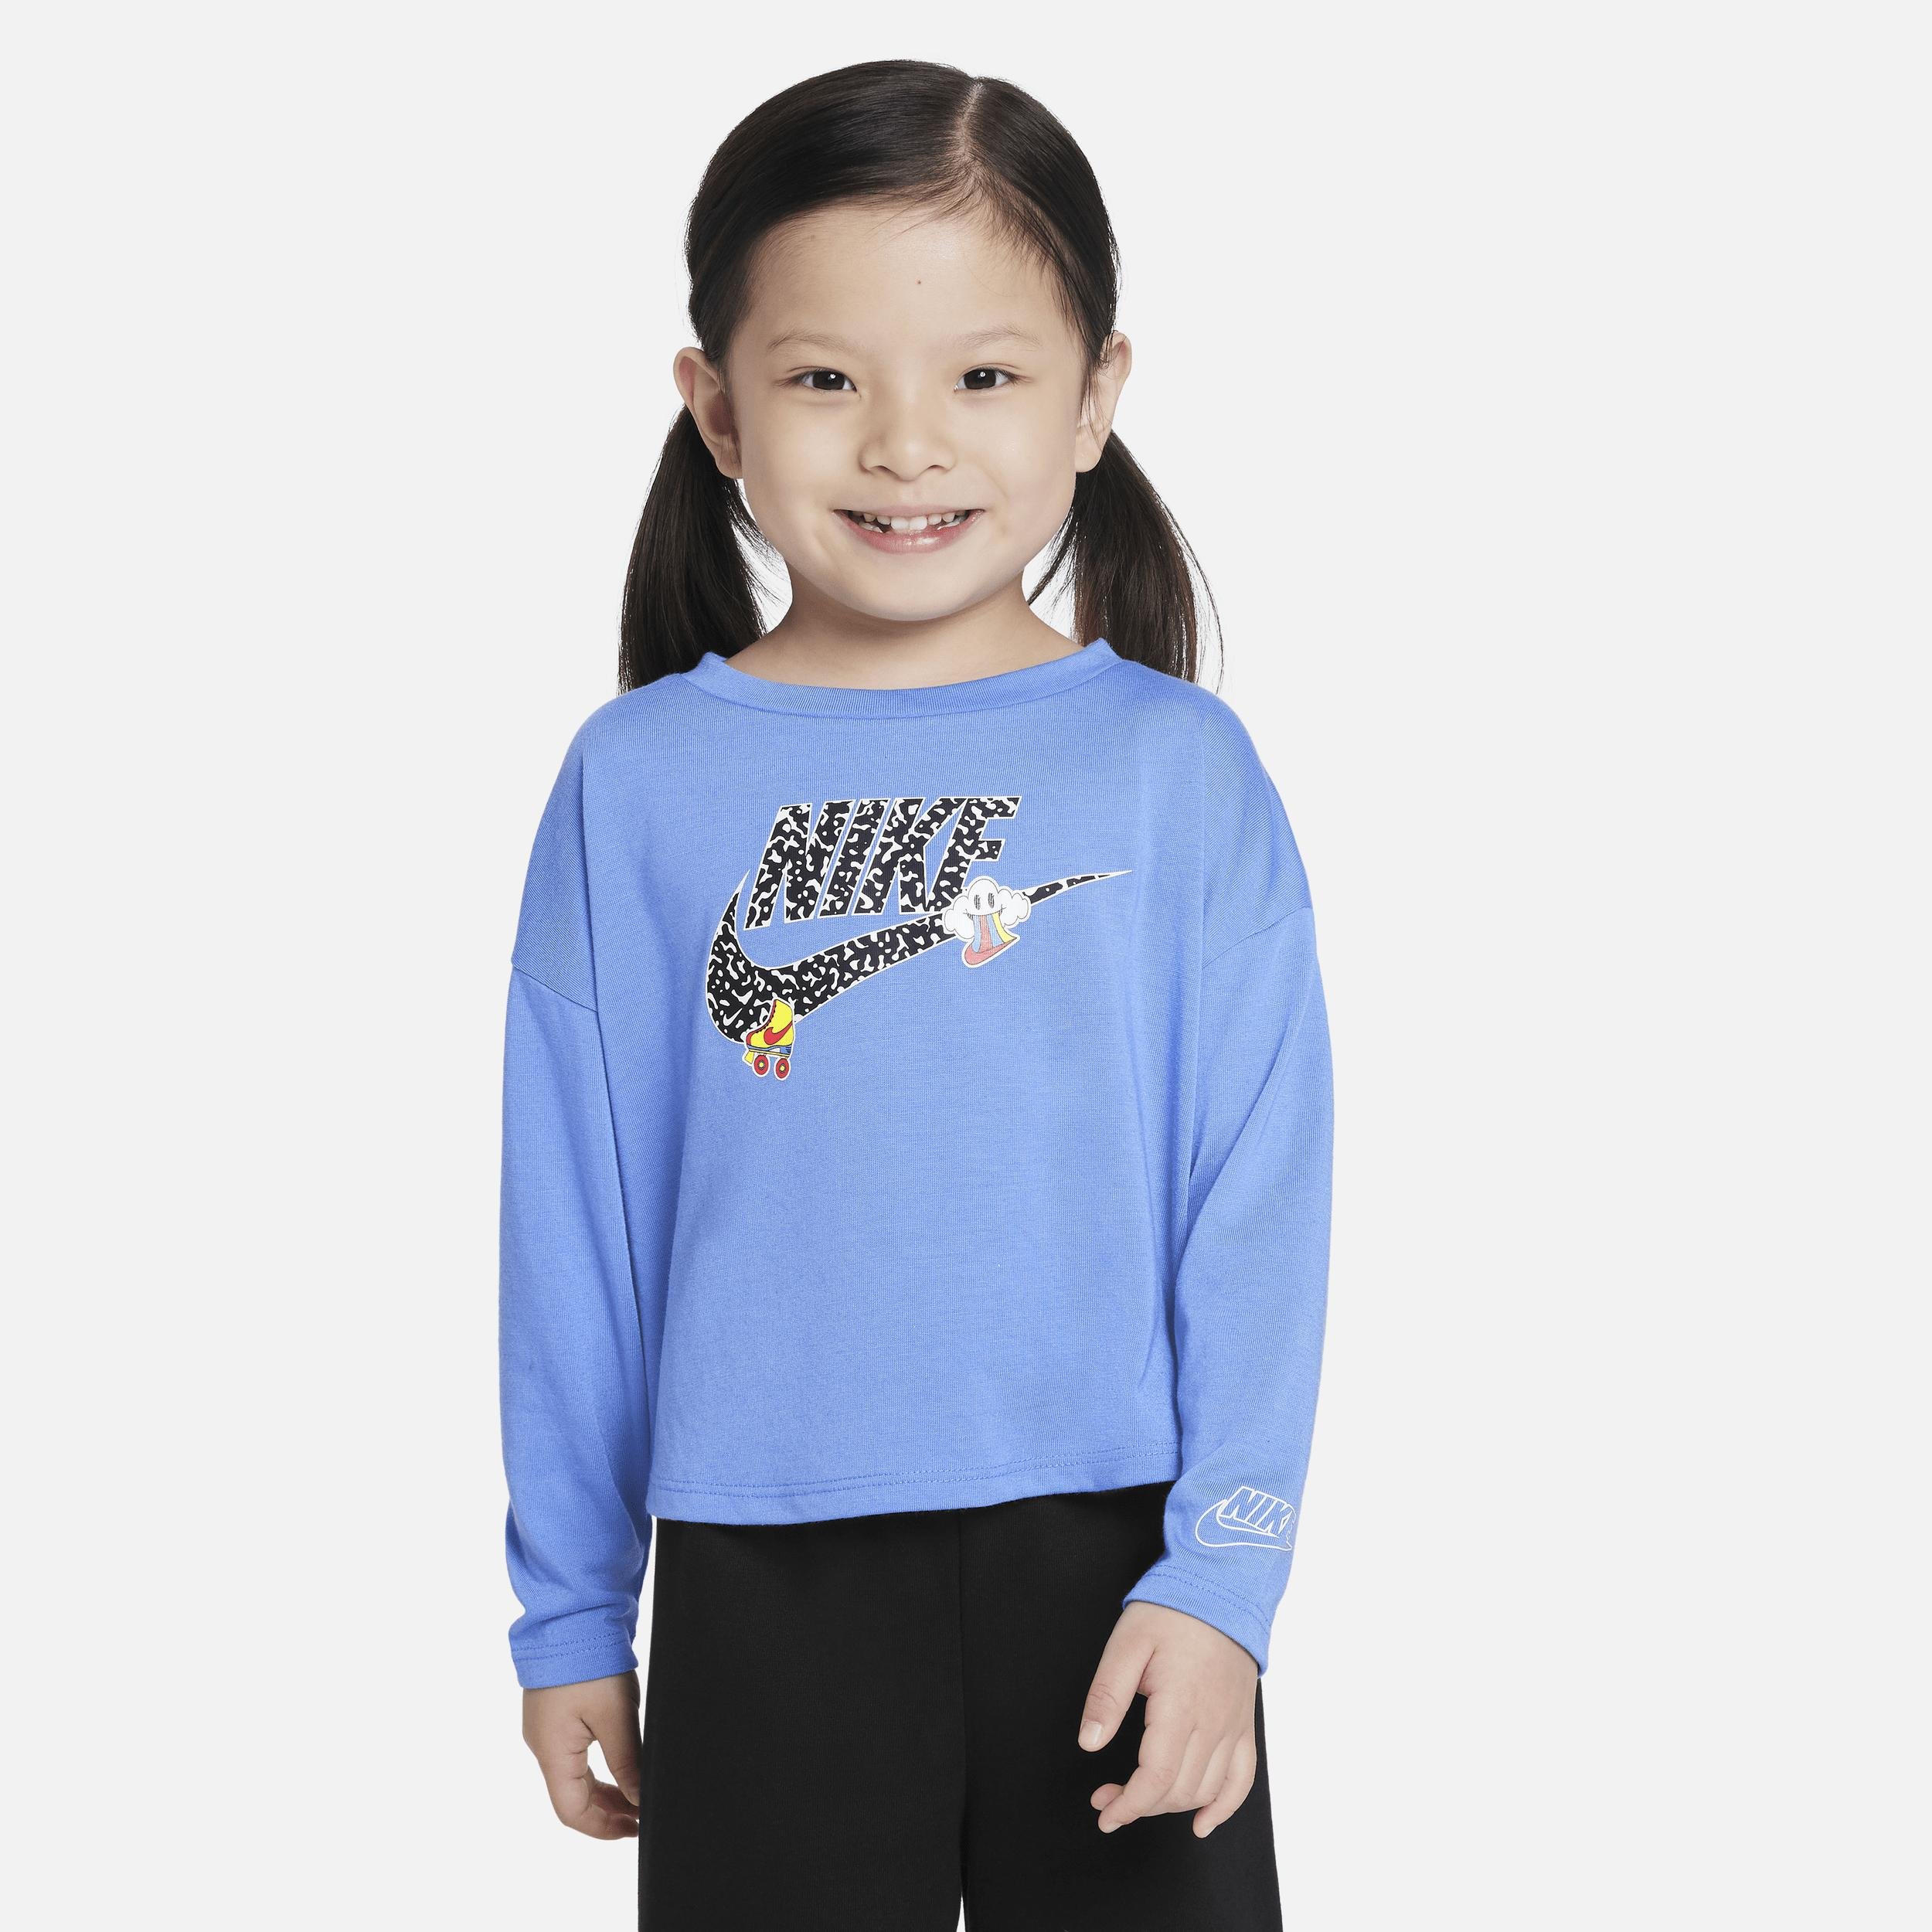 Nike Notebook Print Long Sleeve Knit Top Toddler Top by NIKE